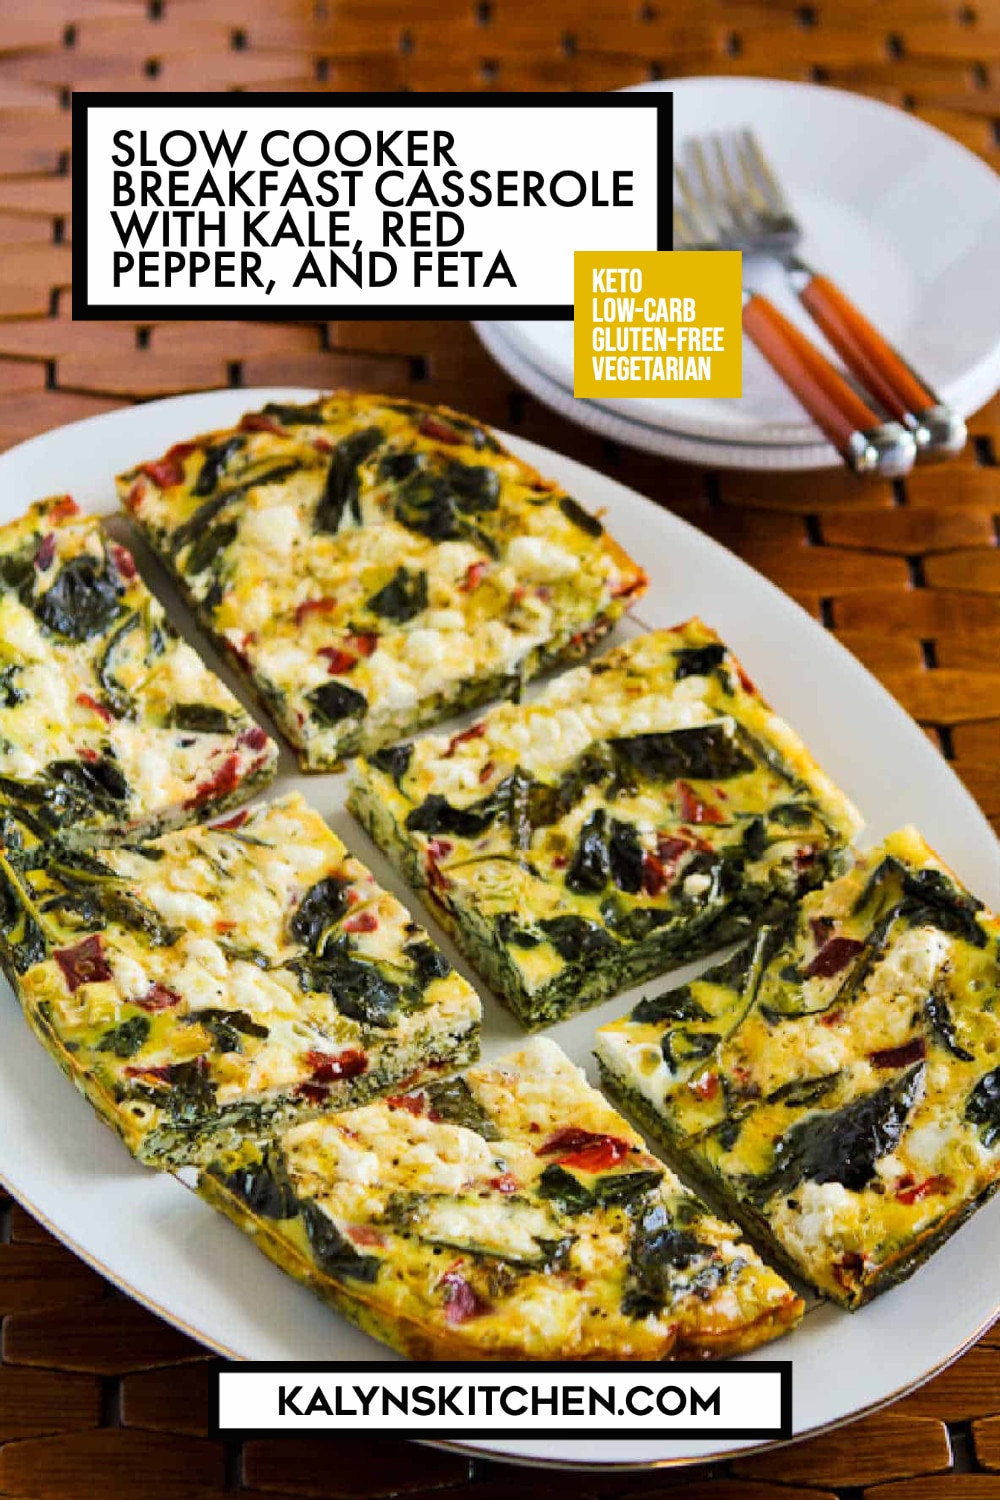 Pinterest image of Slow Cooker Breakfast Casserole with Kale, Red Pepper, and Feta